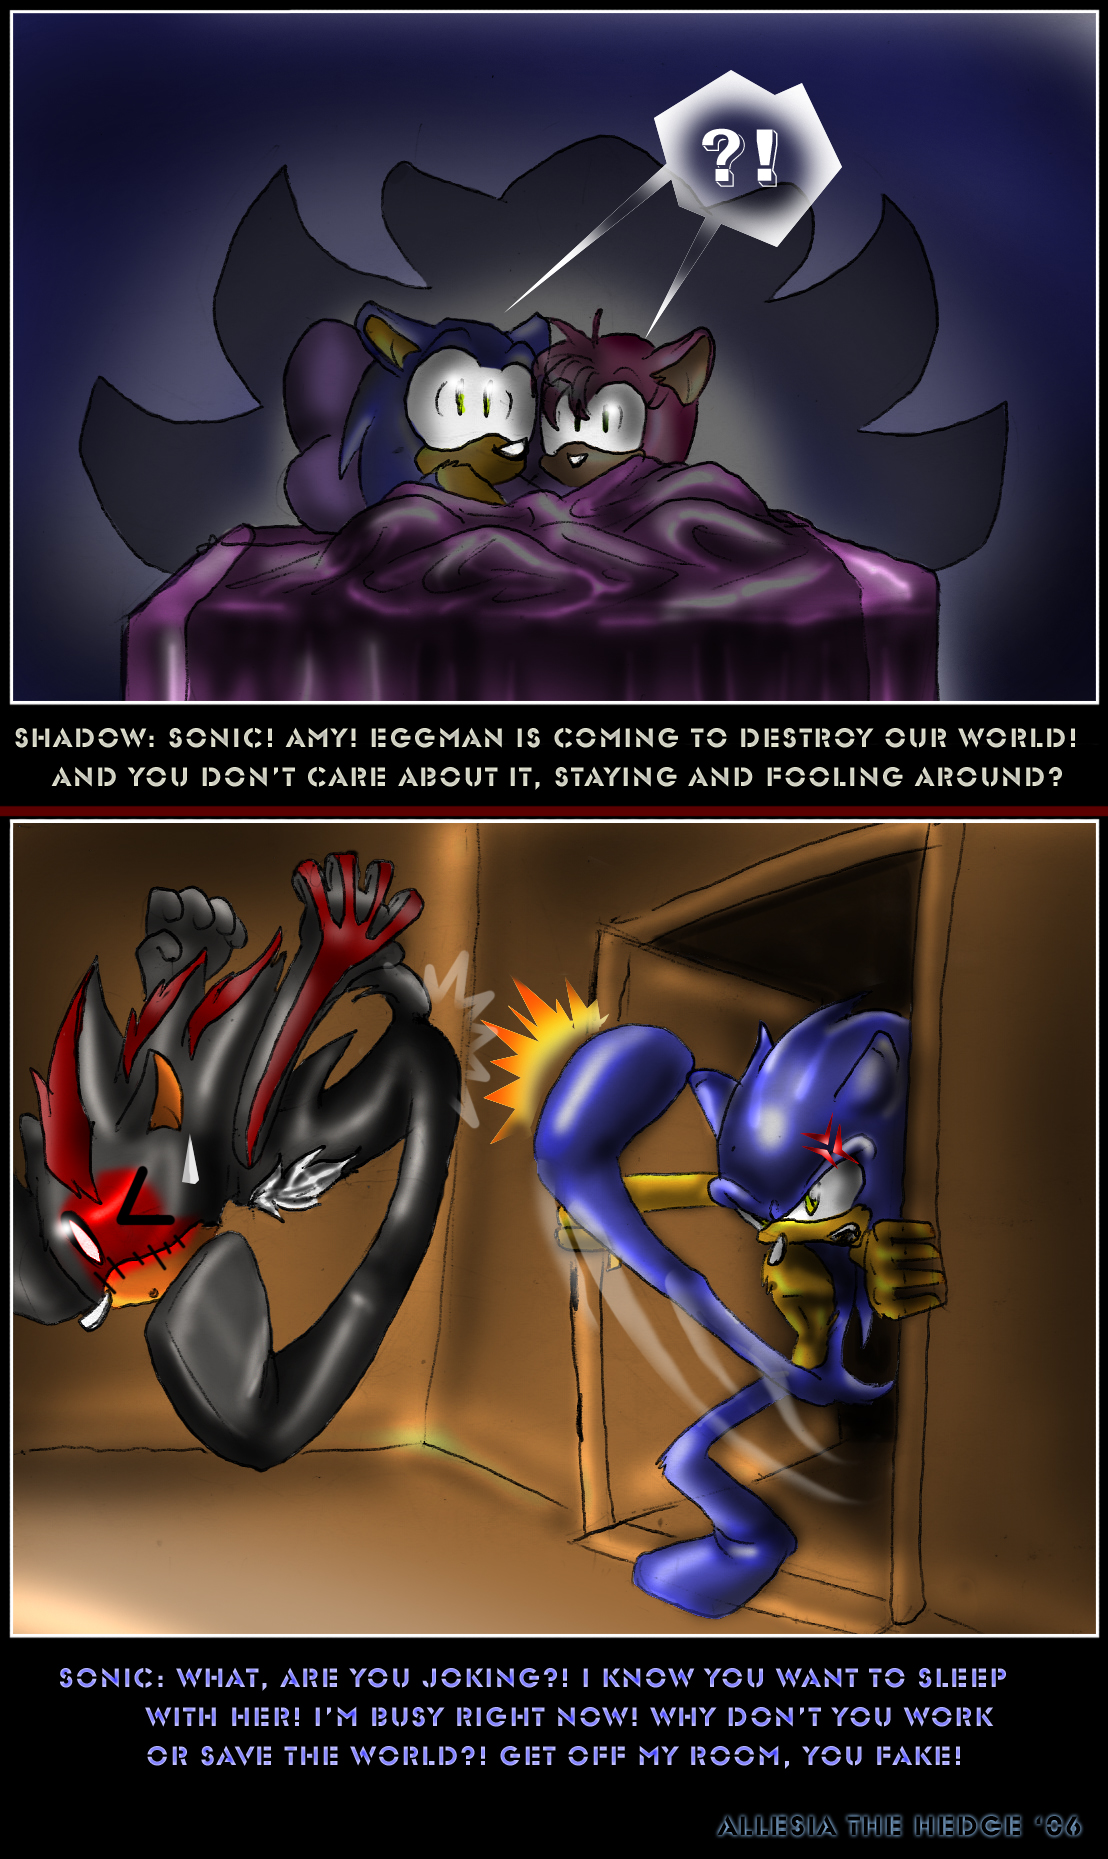 why doesnt shadow work by AllesiaTheHedge